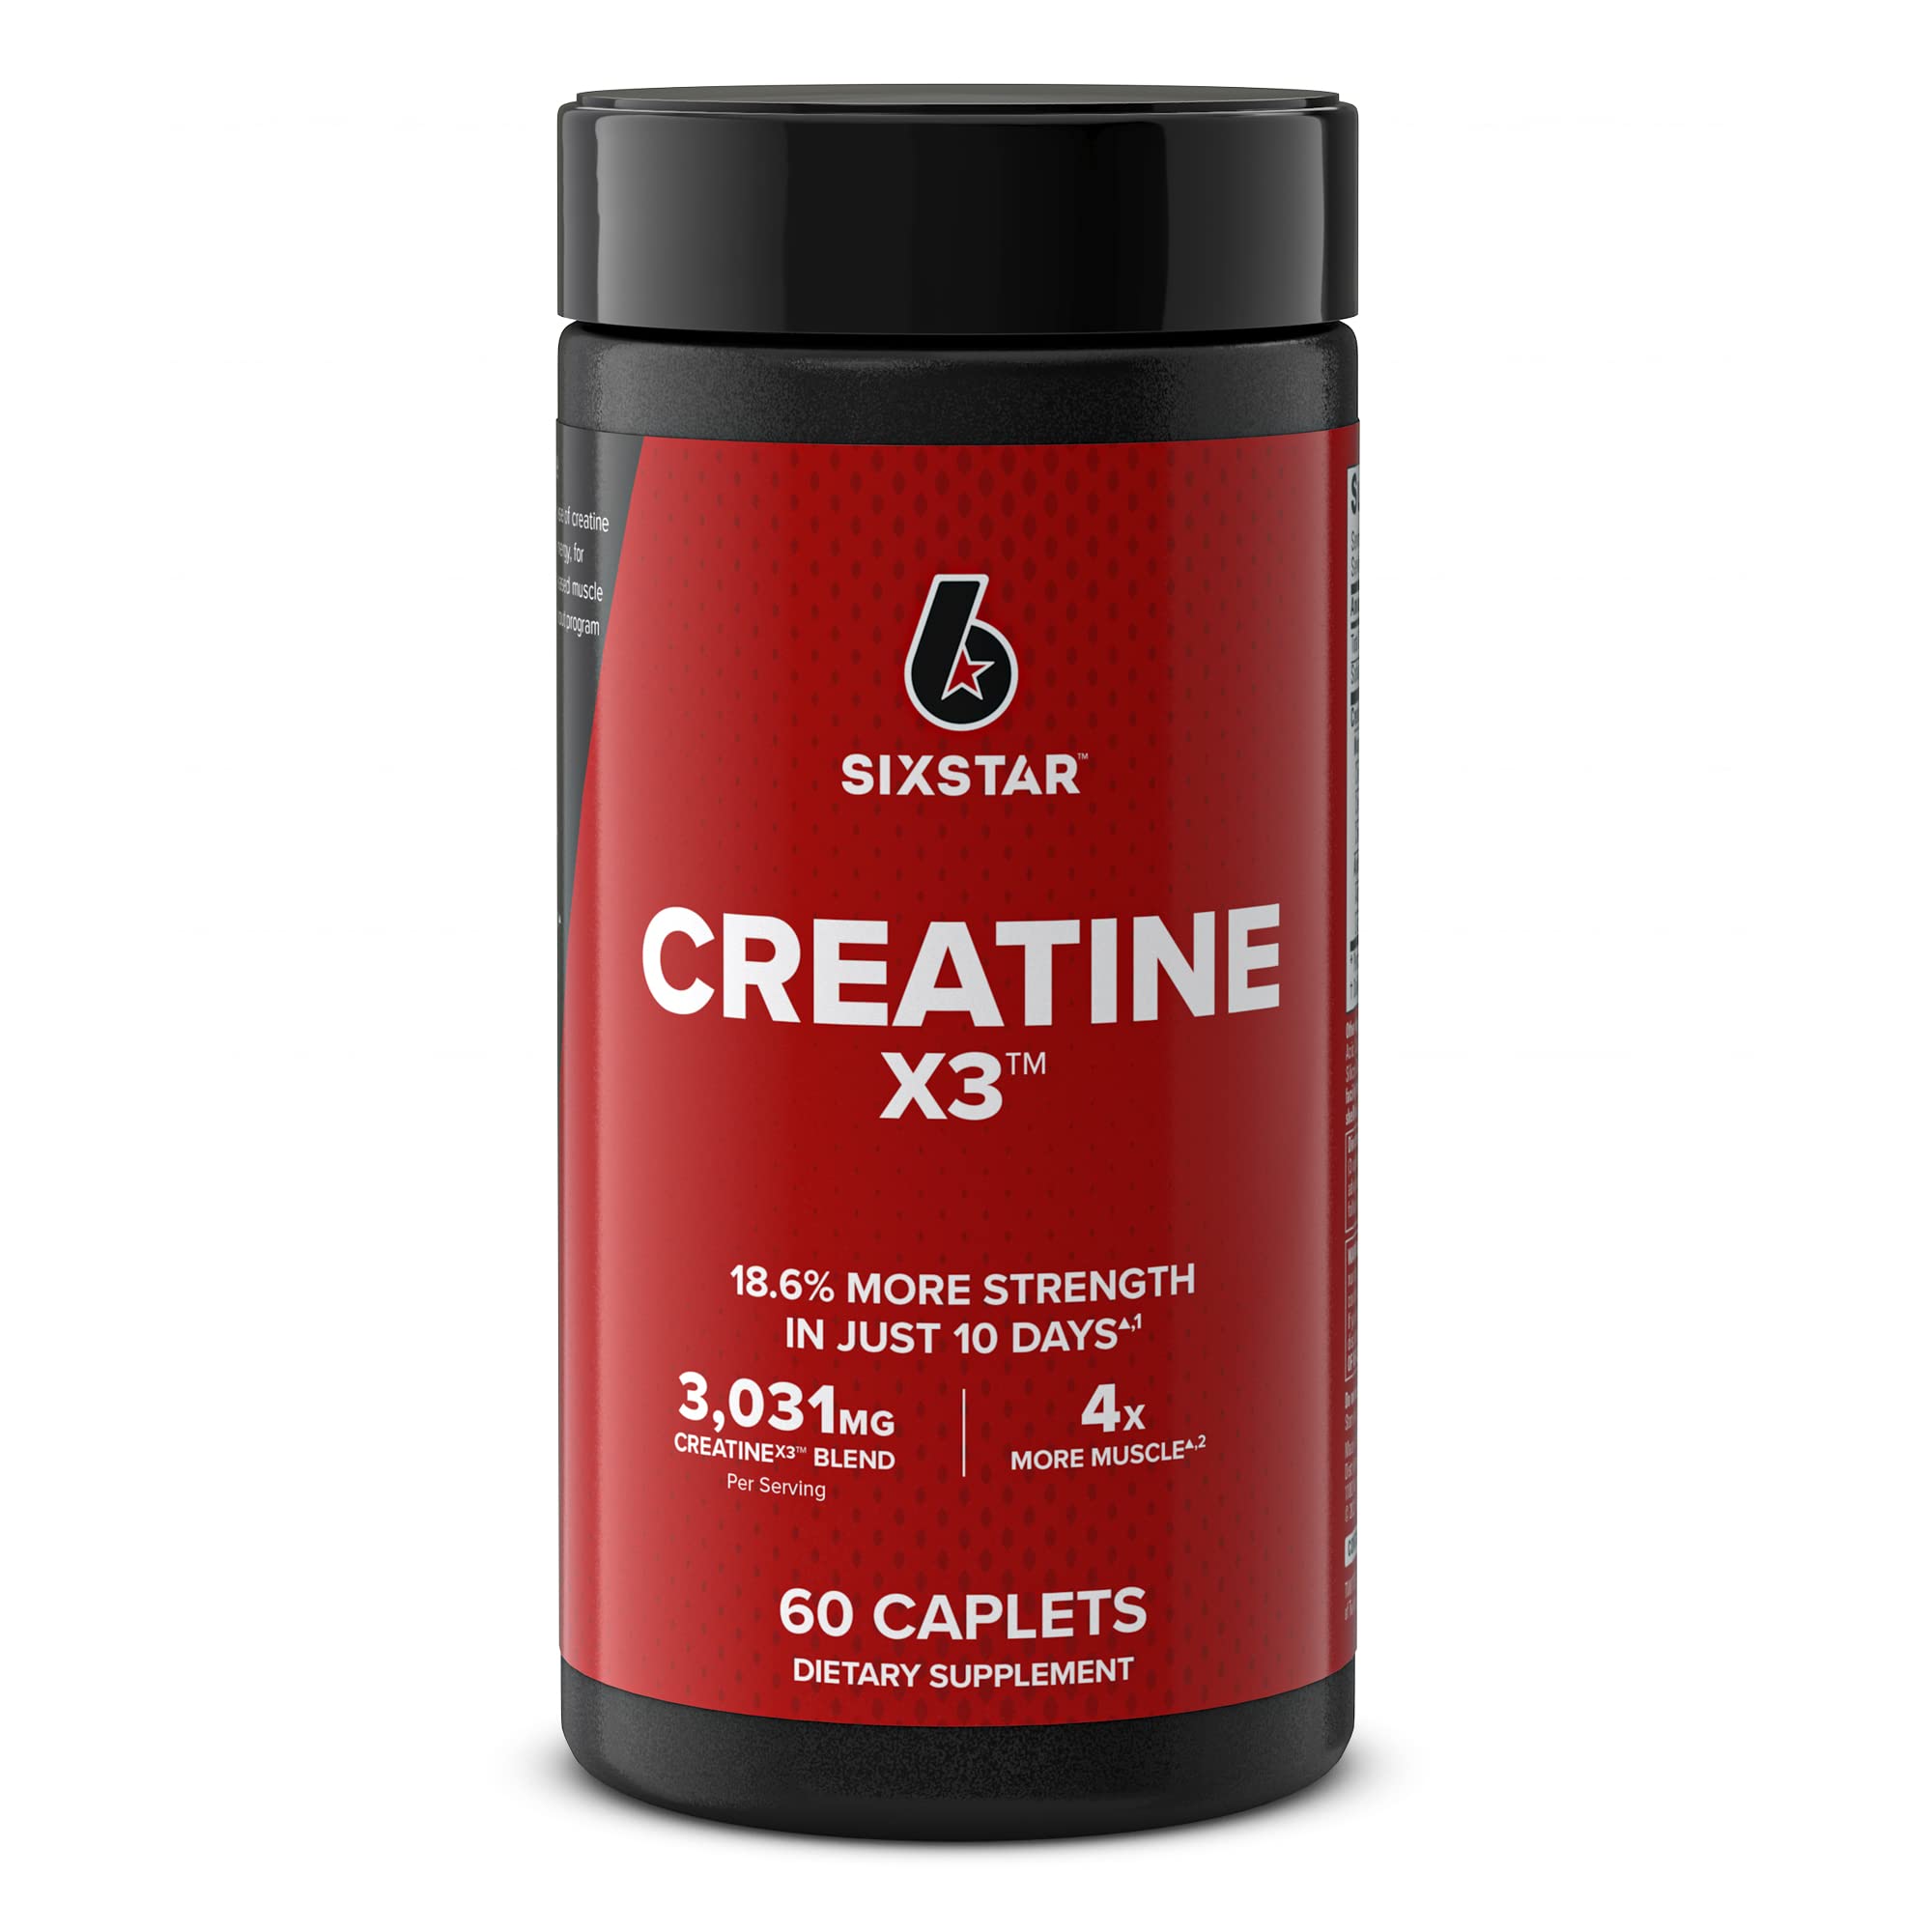 Six Star Creatine Pills Post Workout X3 Creatine Capsules, Creatine Monohydrate Blend, Muscle Recovery & Muscle Builder for Men & Women, Creatine Supplements, 20 Servings